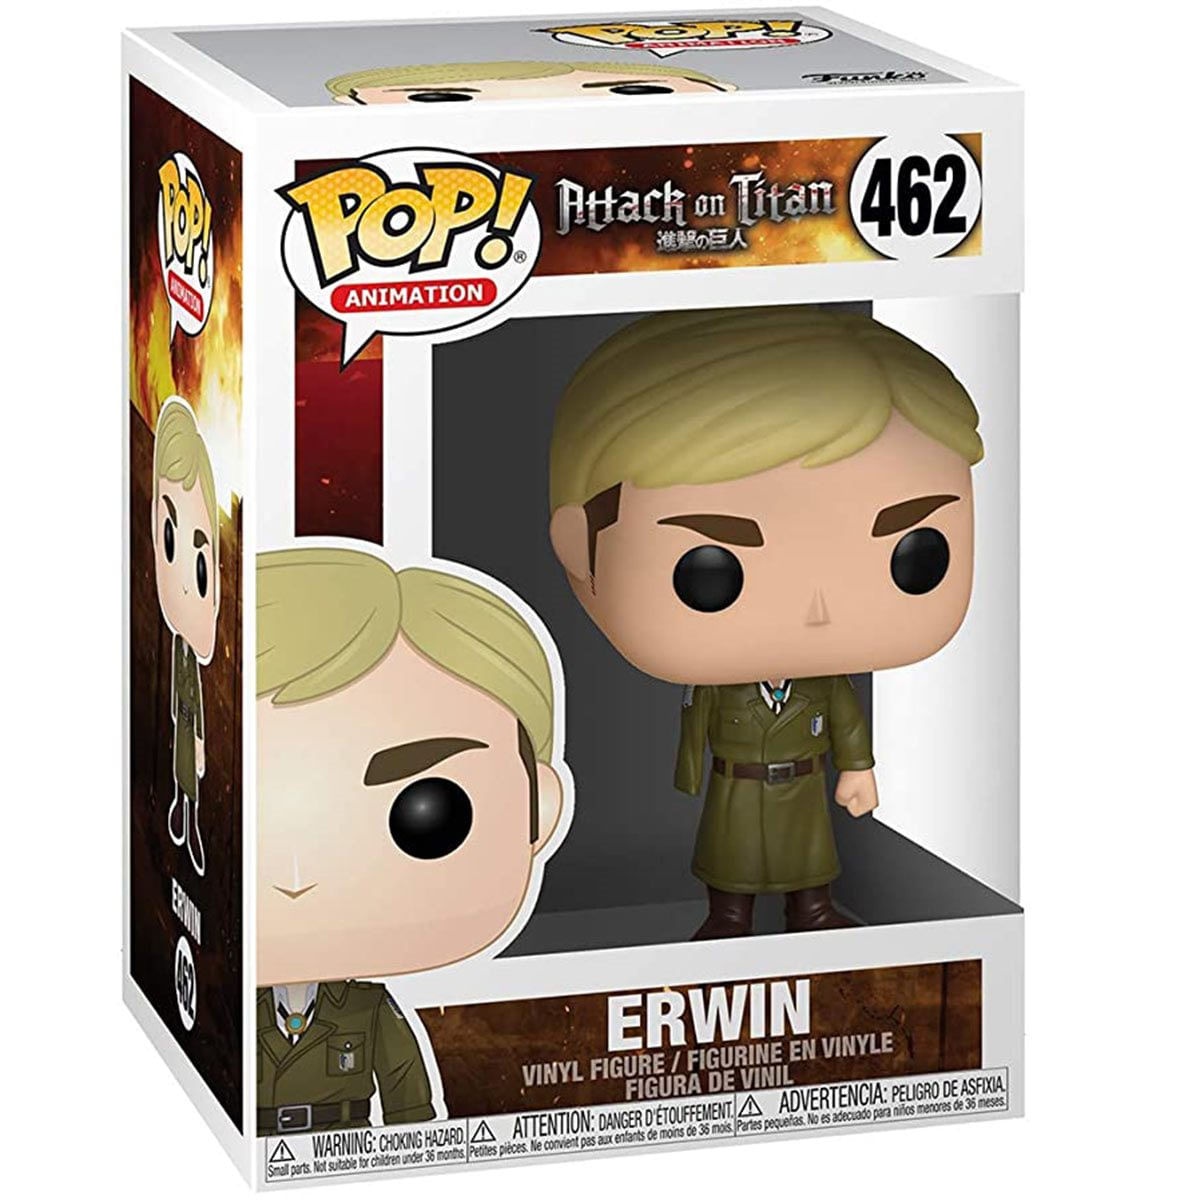 Funko Pop! Animation Attack on Titan Erwin One-Armed #462